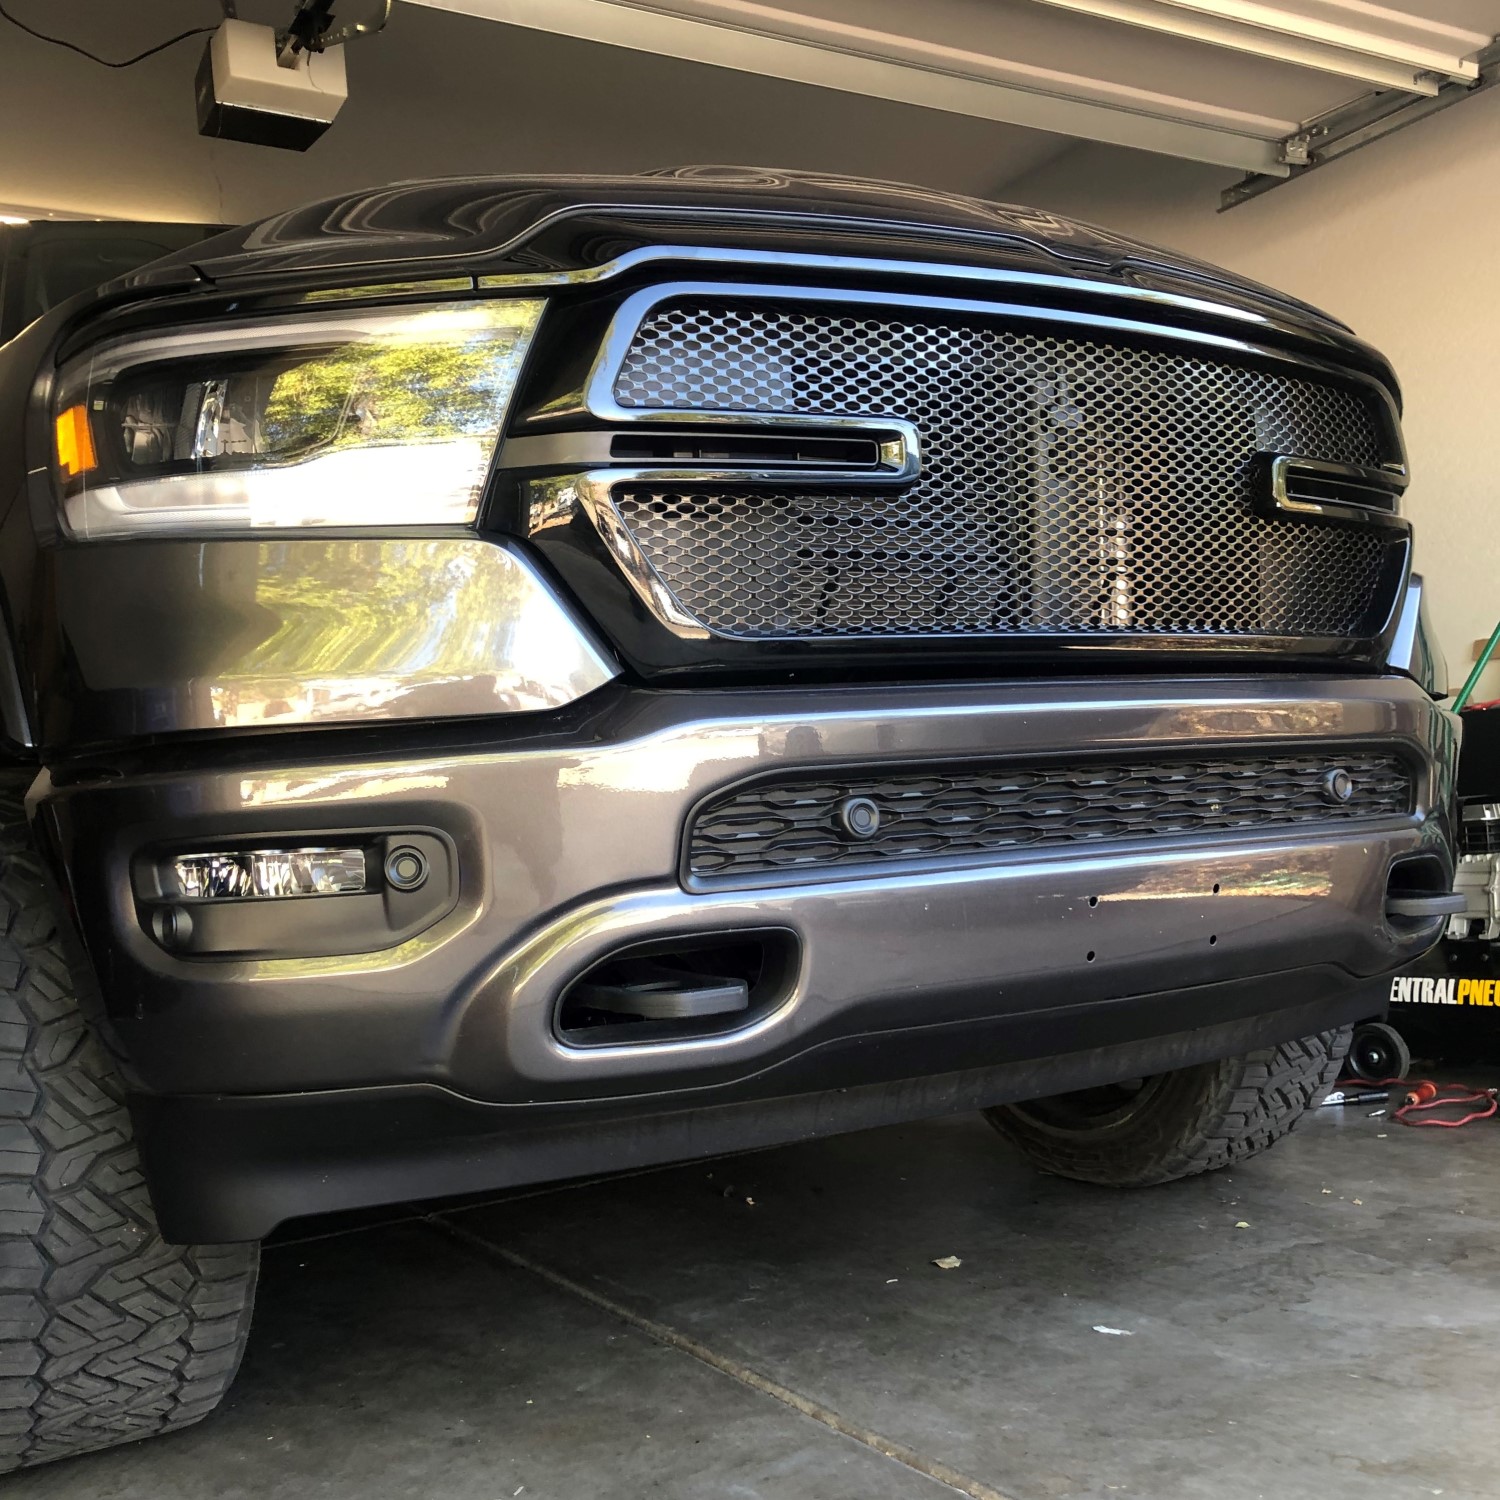 Badgeless and Blacked Out - The Simple Grille Install for the 2019+ Dodge Ram That Looks Super Sleek